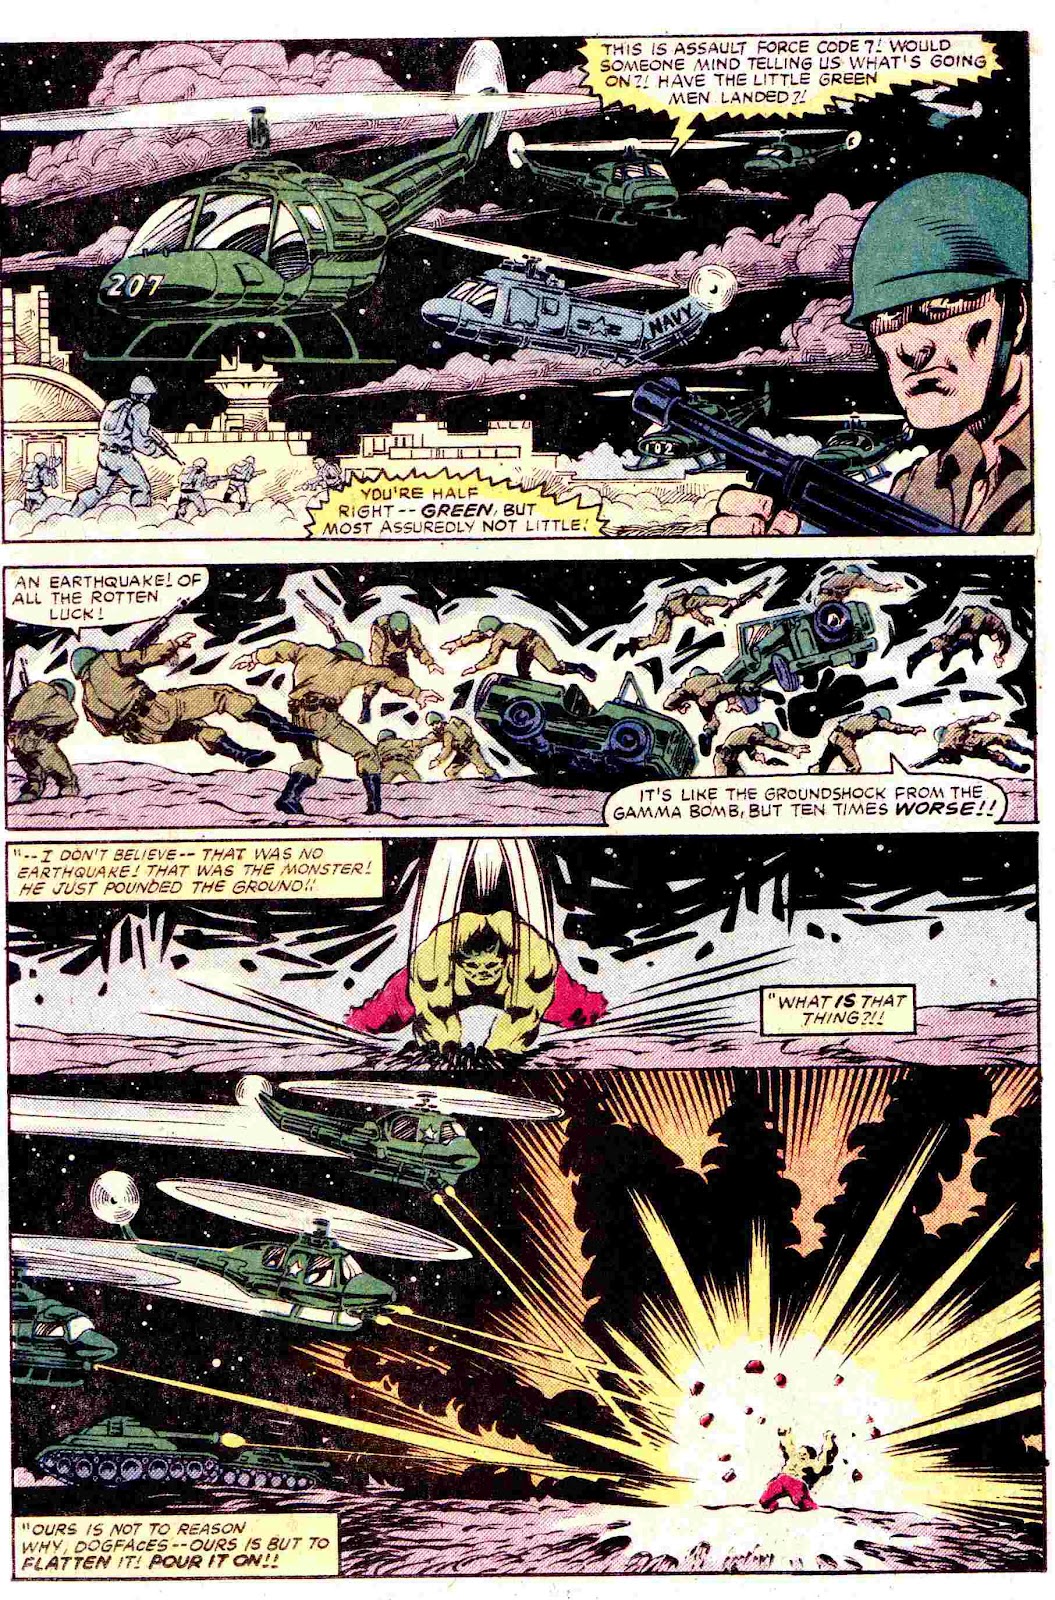 What If? (1977) issue 45 - The Hulk went Berserk - Page 21